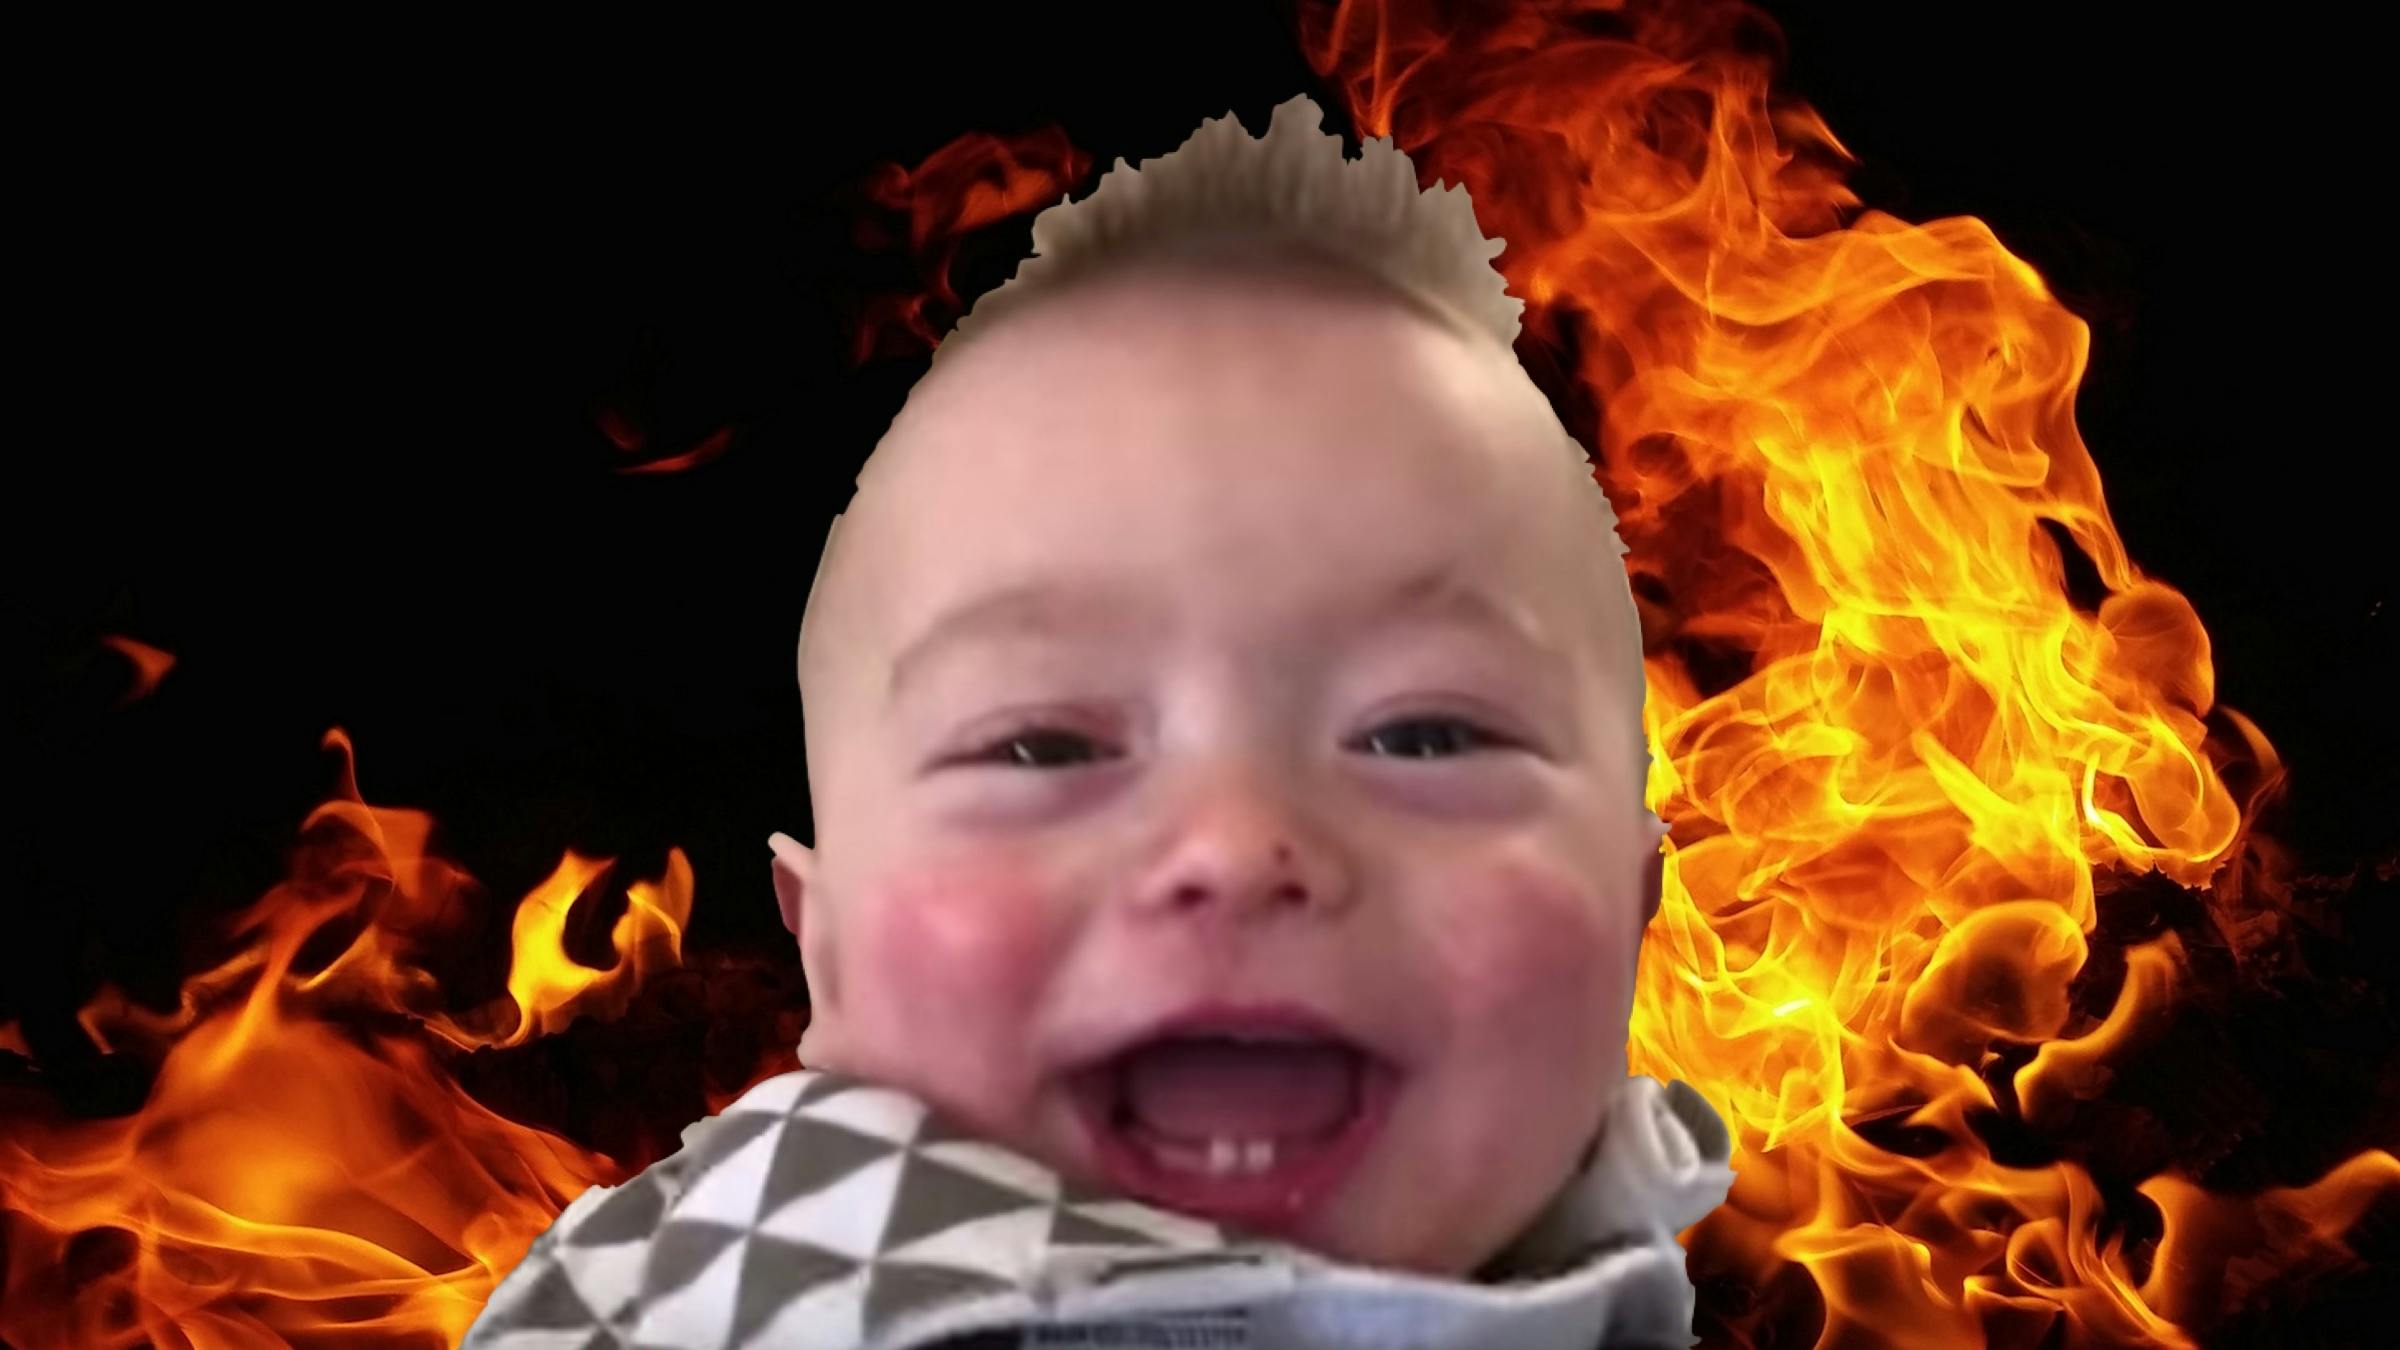 YouTuber Painstakingly Organizes His Baby's Noises Into AC/DC's Thunderstruck